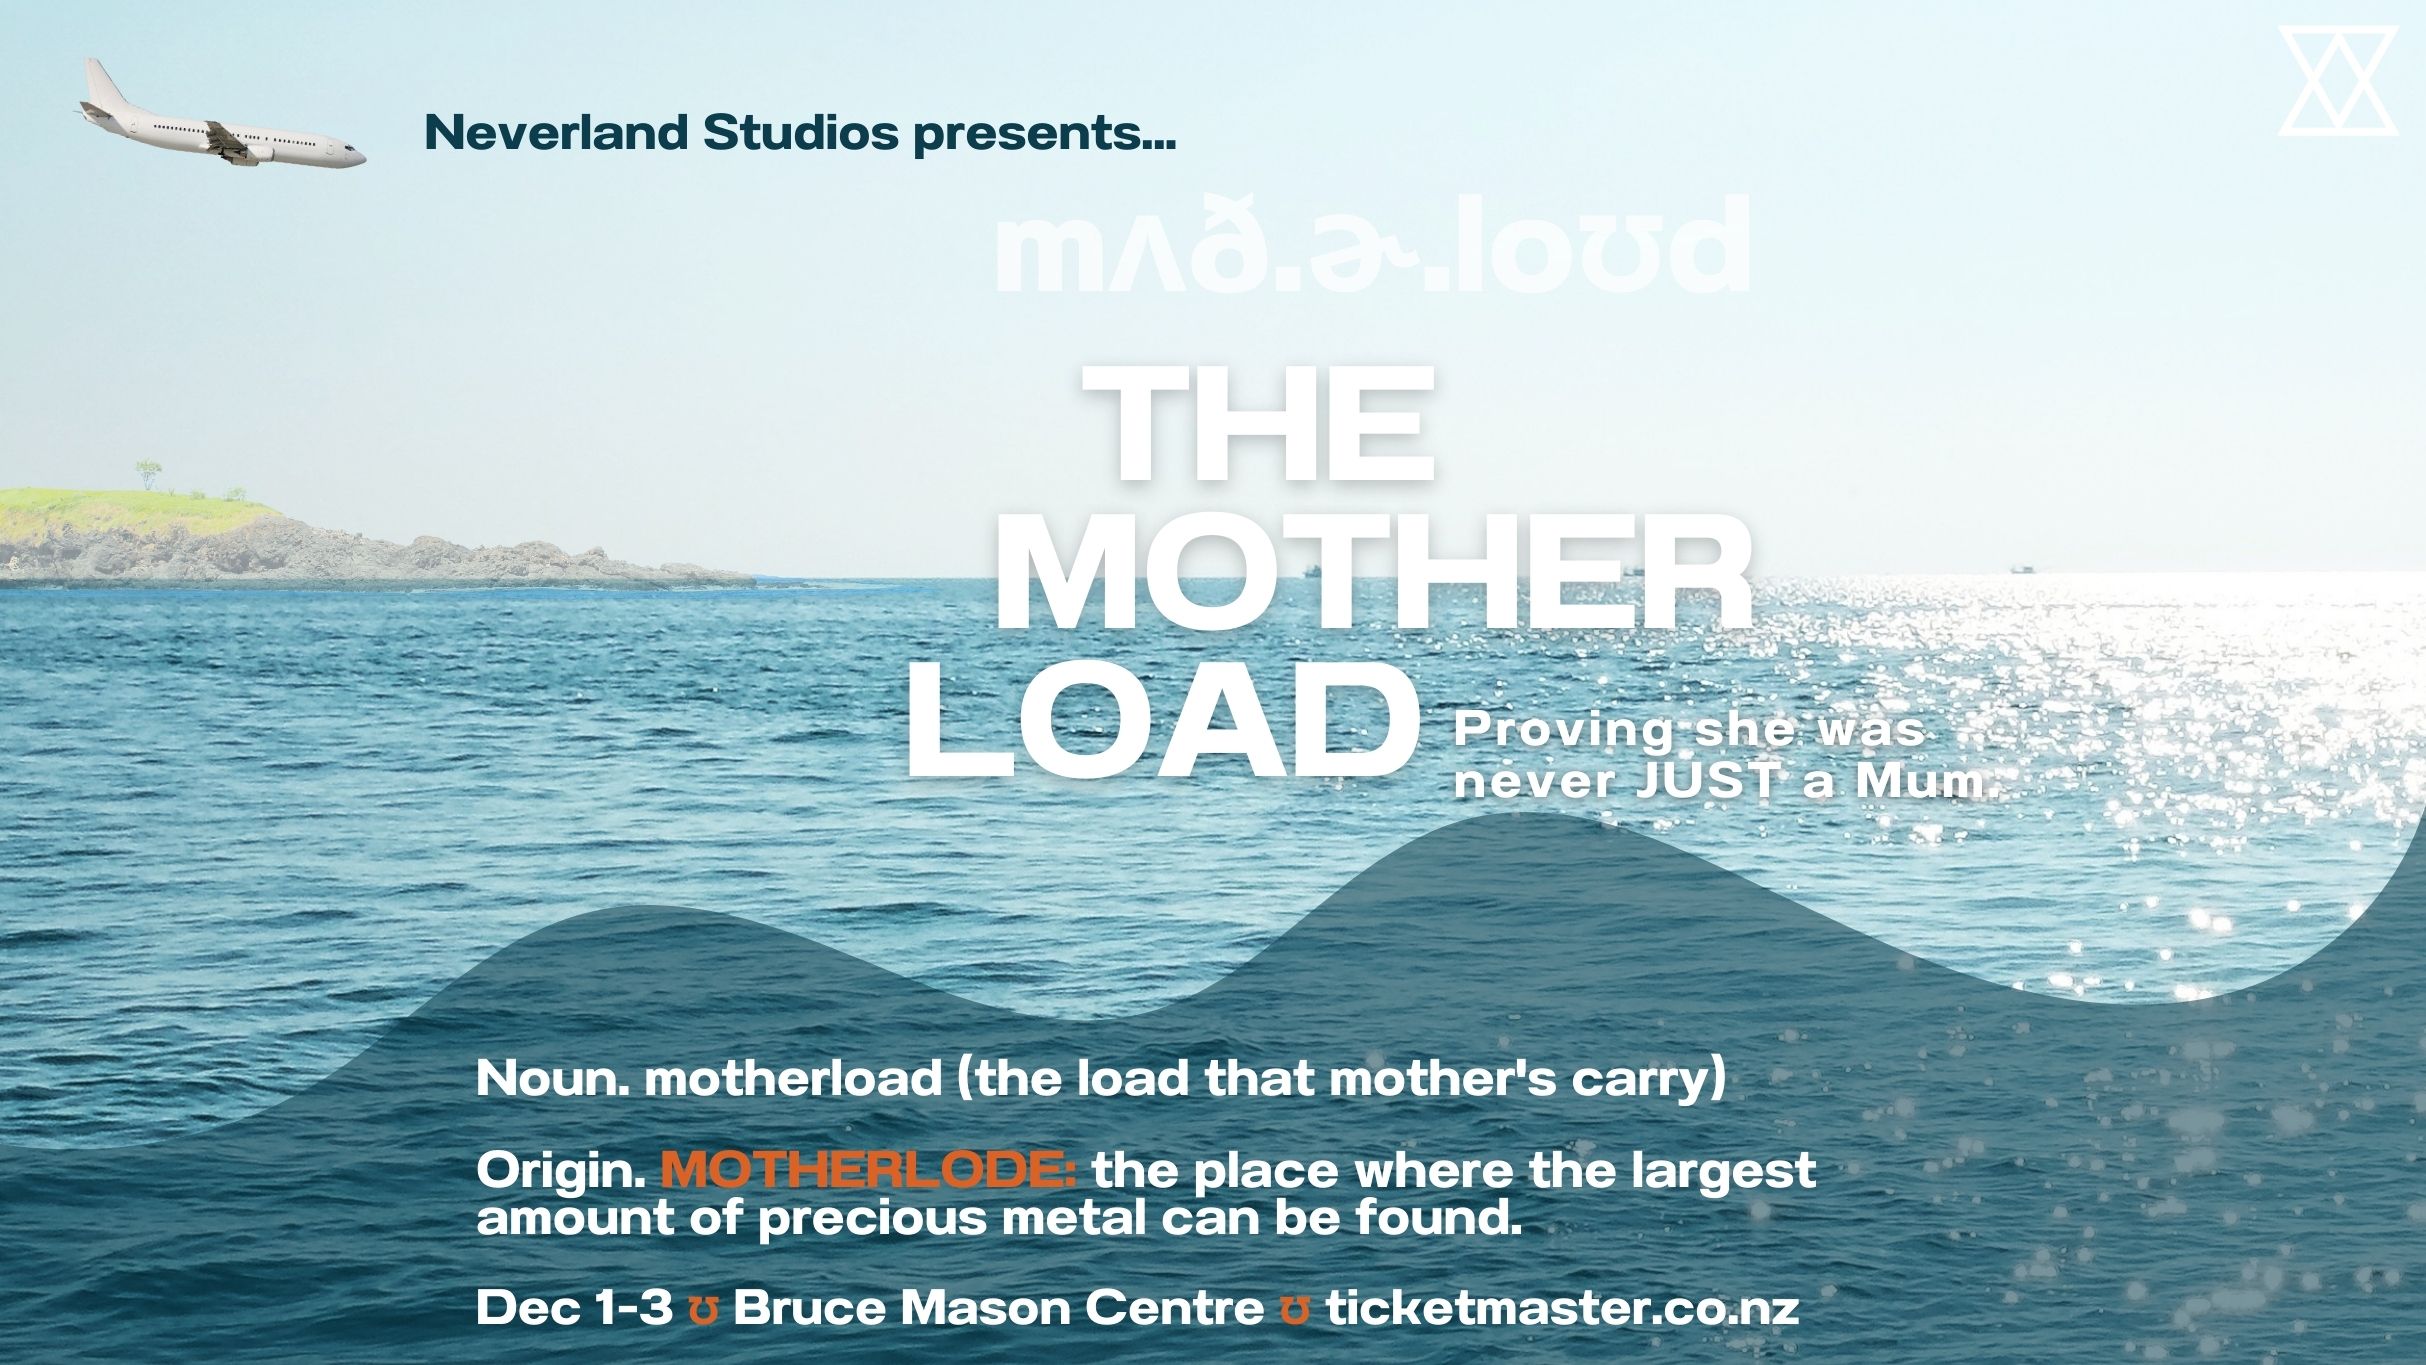 Image used with permission from Ticketmaster | Neverland Studios presents The Motherload tickets